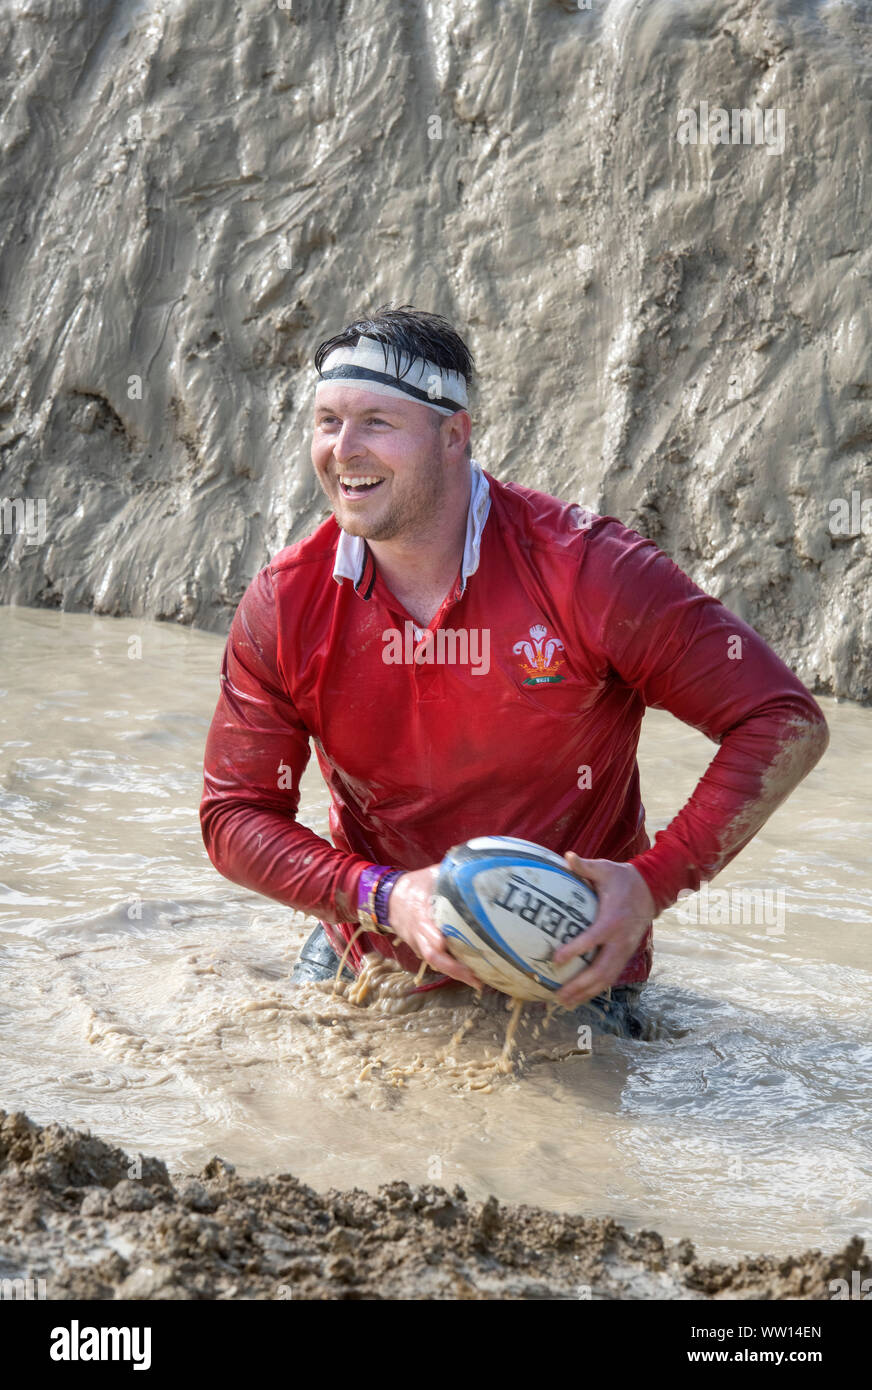 A competitor dressed as a Wales rugby player on the ‘Mud Mile’ at the Tough Mudder endurance event in Badminton Park, Gloucestershire UK Stock Photo